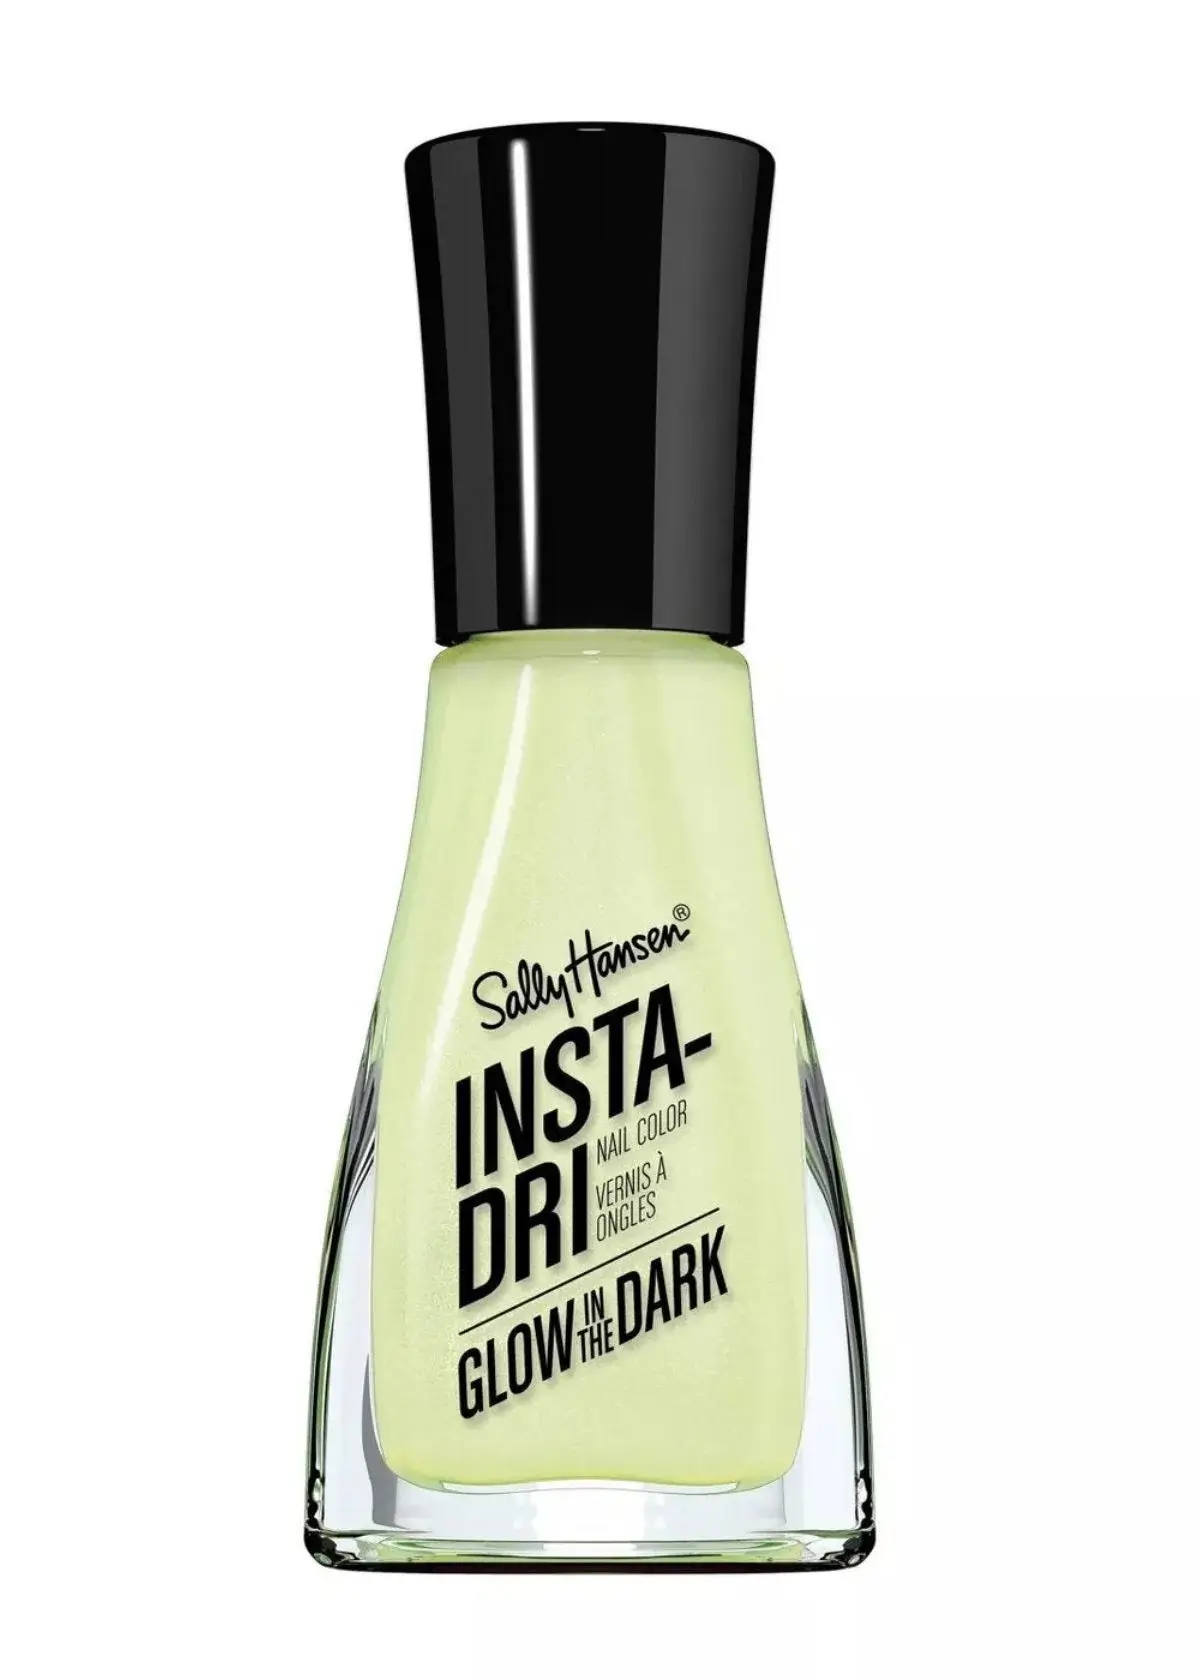 How to choose the right glow in the dark nail polish?